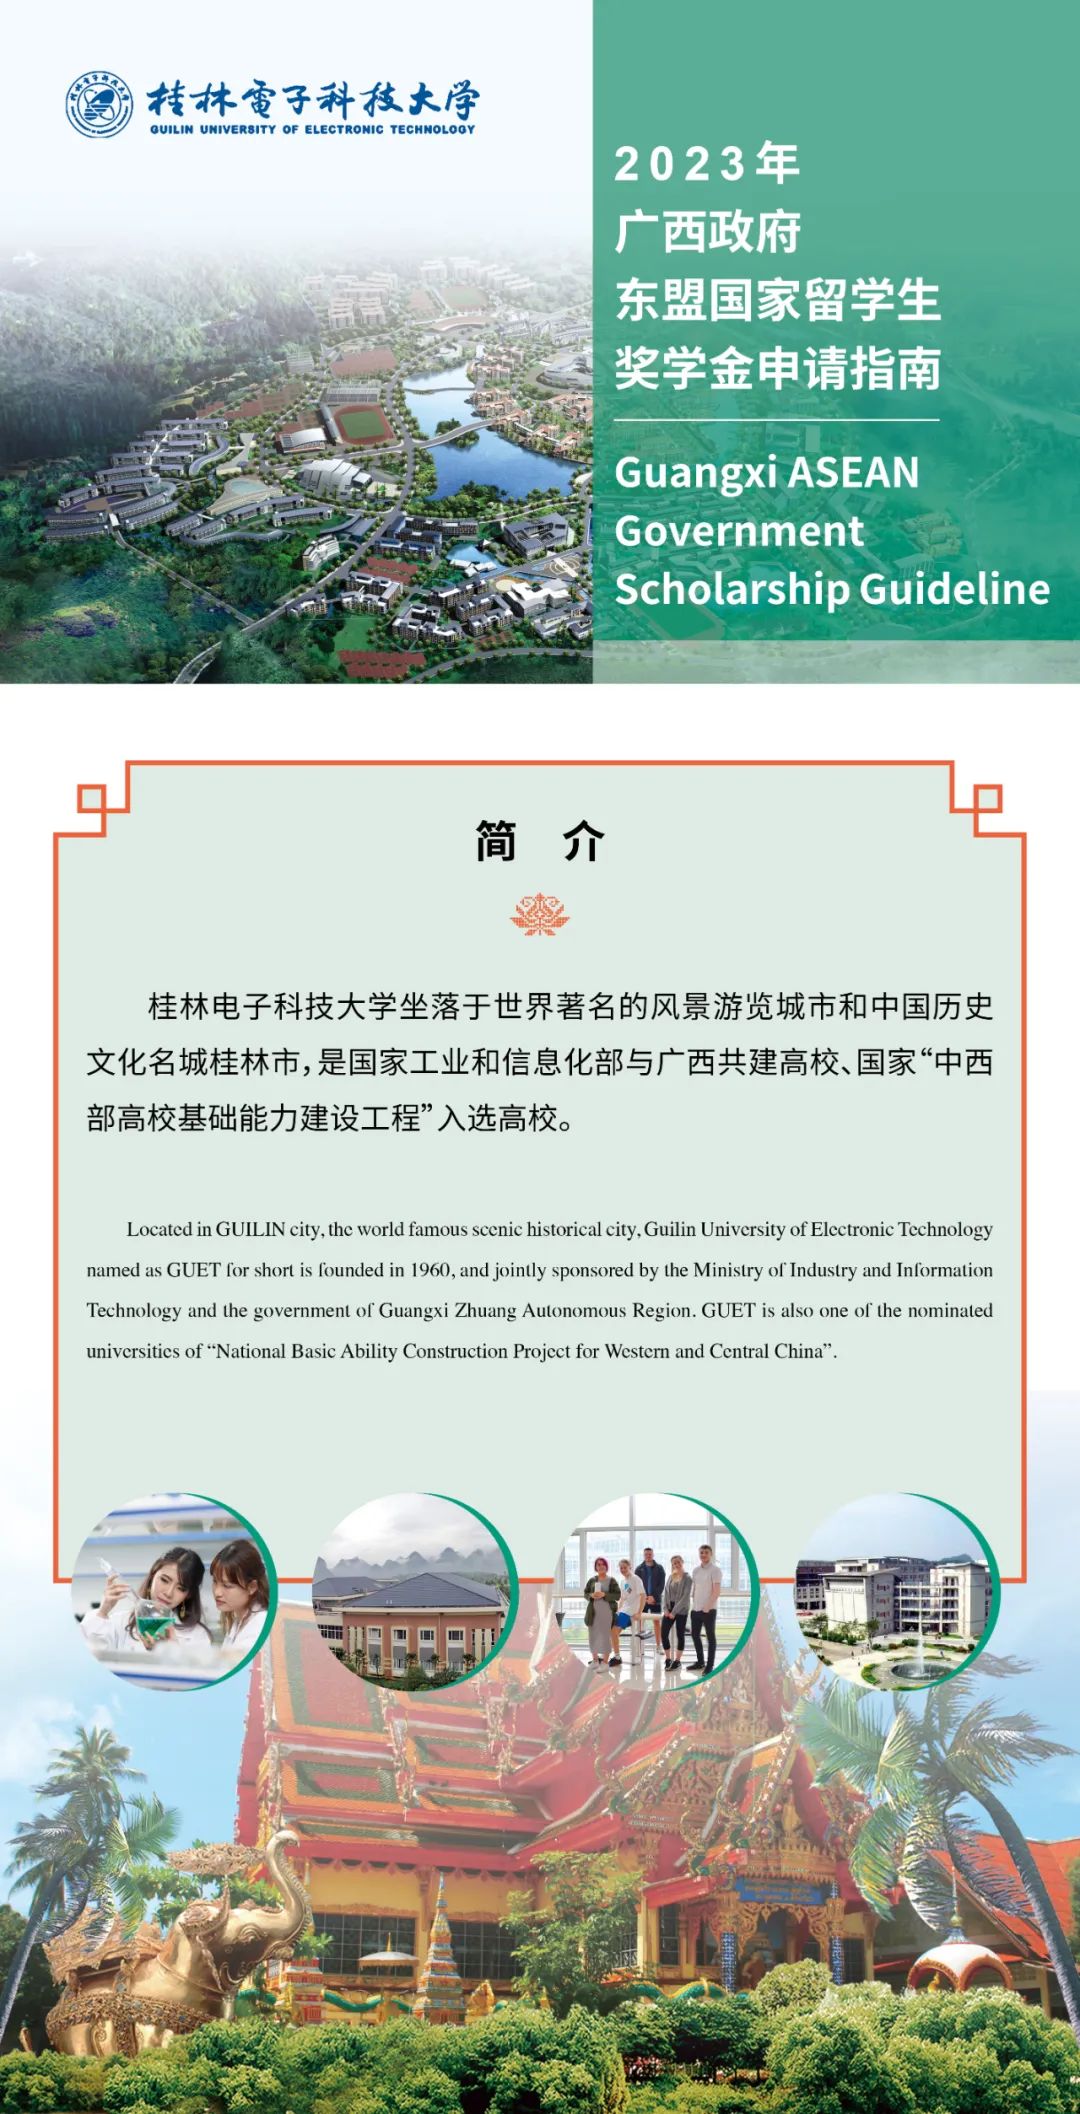 Guilin University of Electronic Technology (GUET) Guangxi ASEAN Government Scholarship Guideline